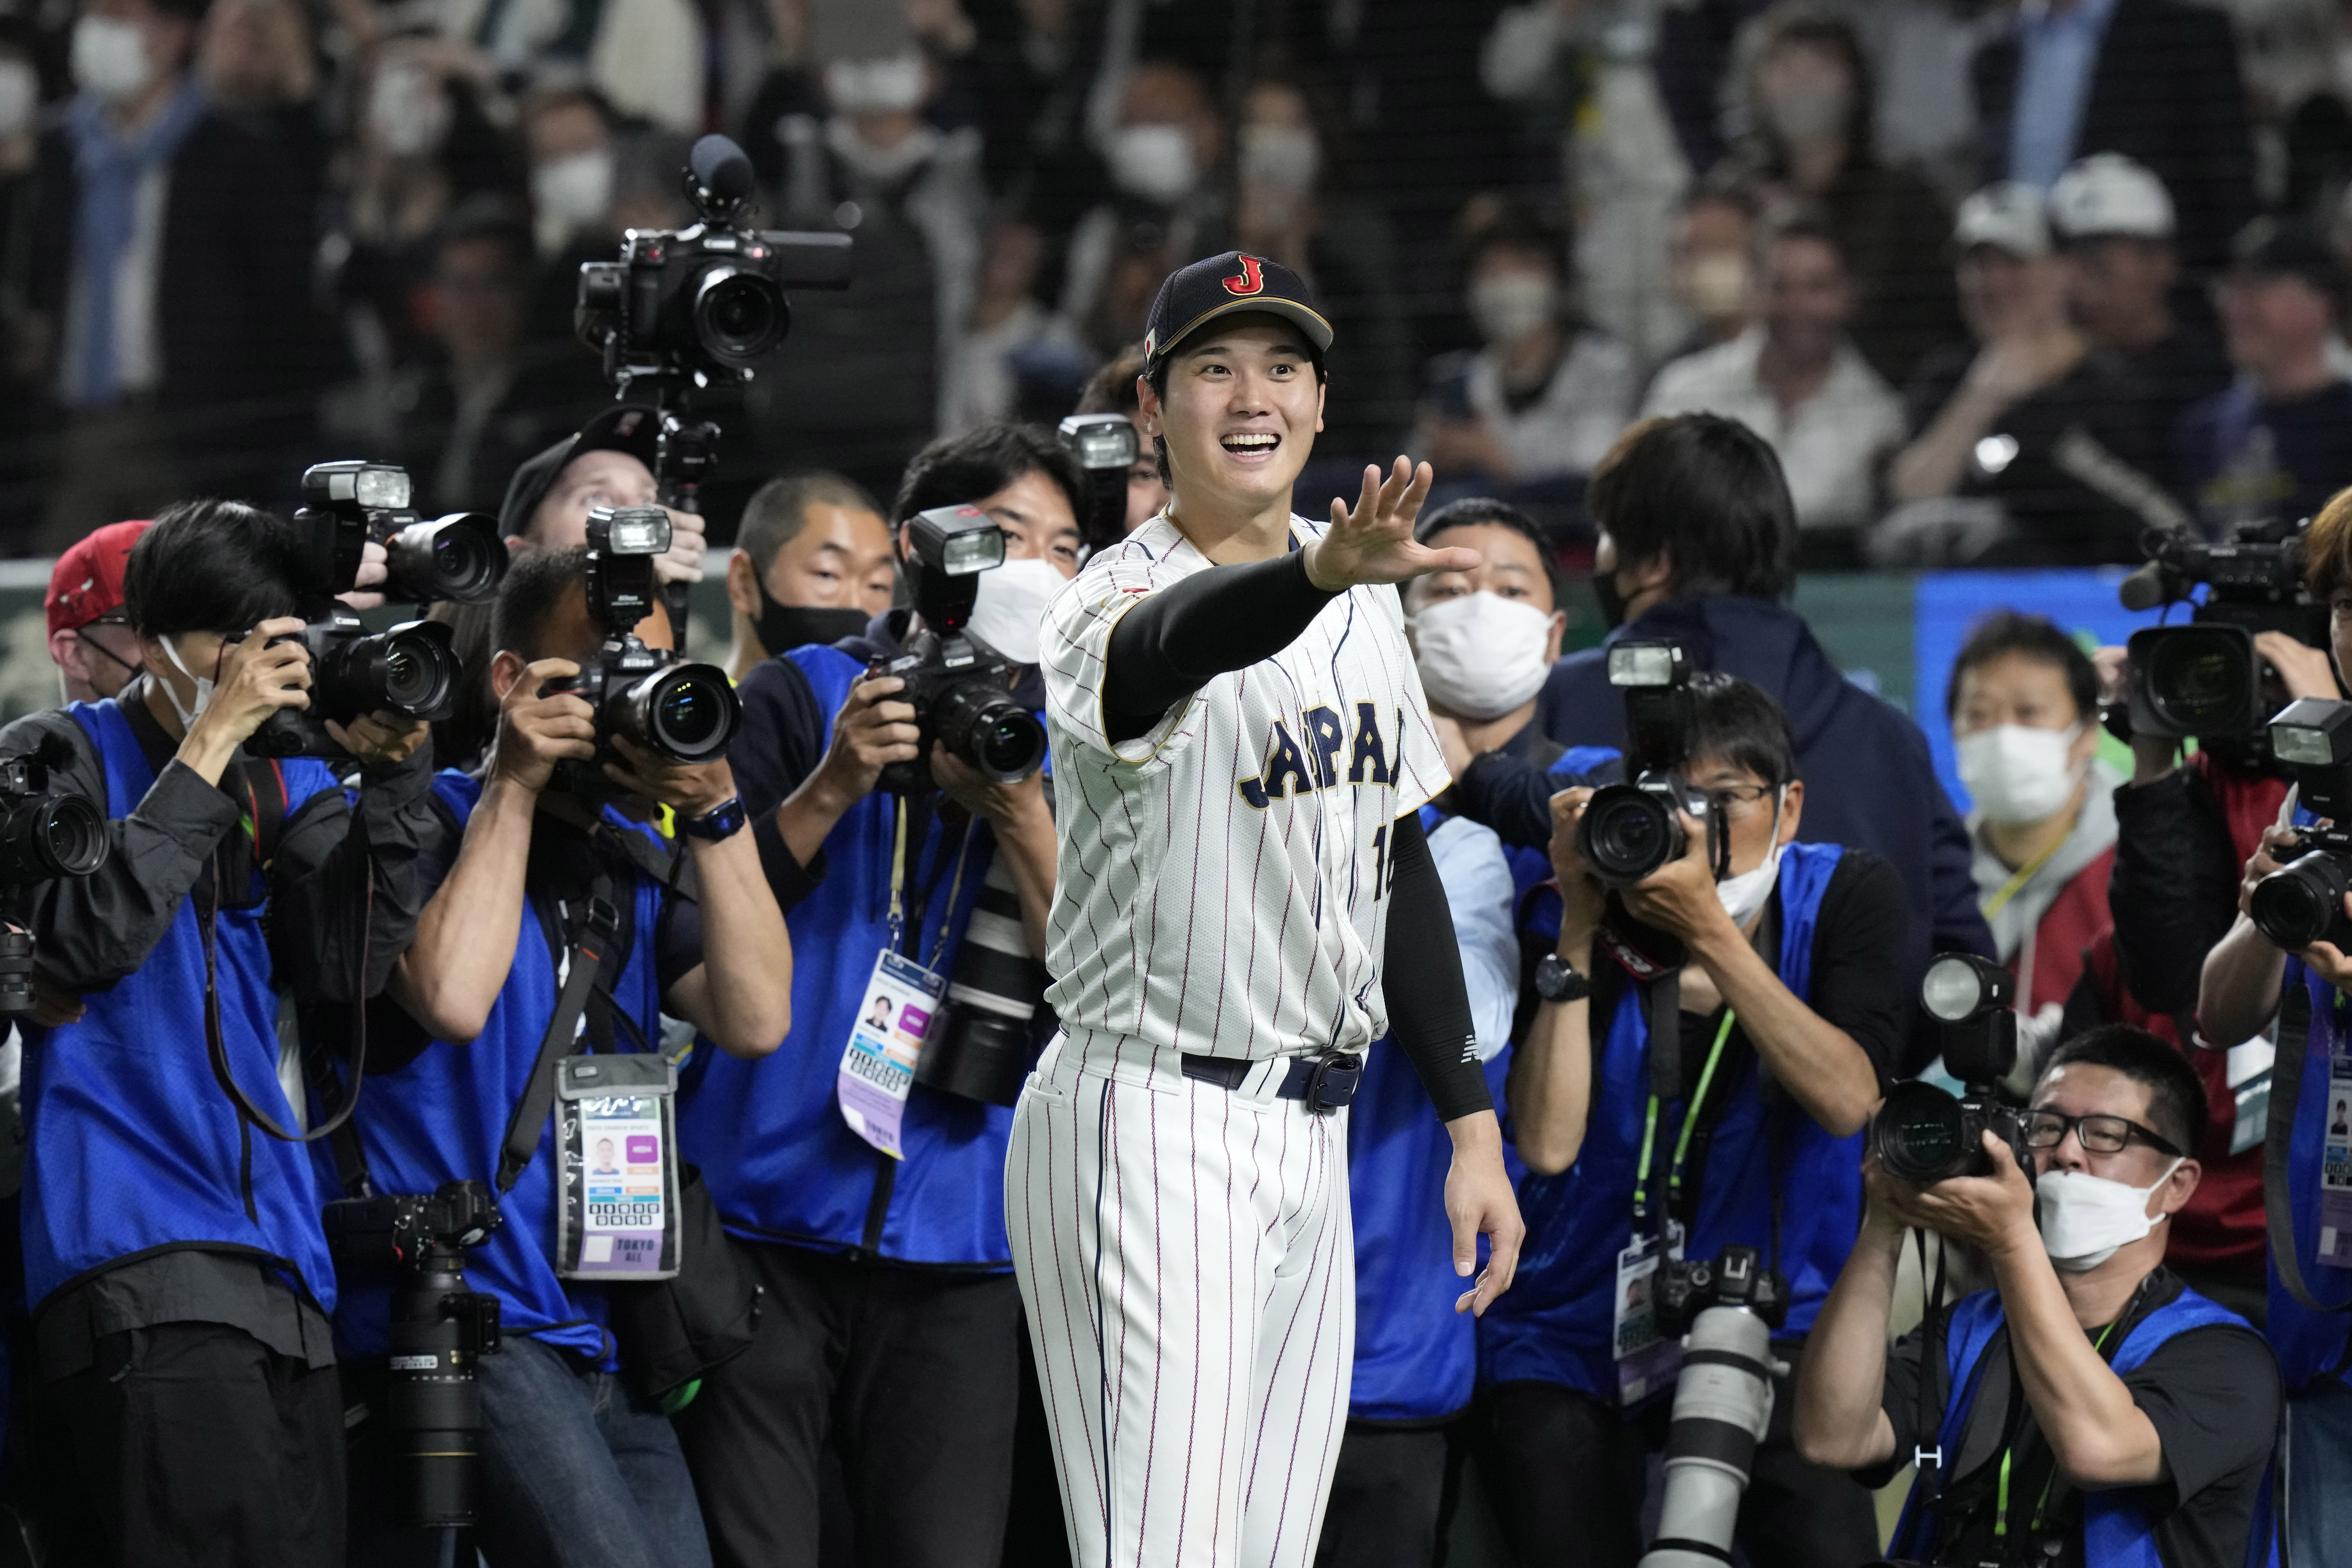 He's nasty': Mike Trout gets real on potentially facing Shohei Ohtani in WBC